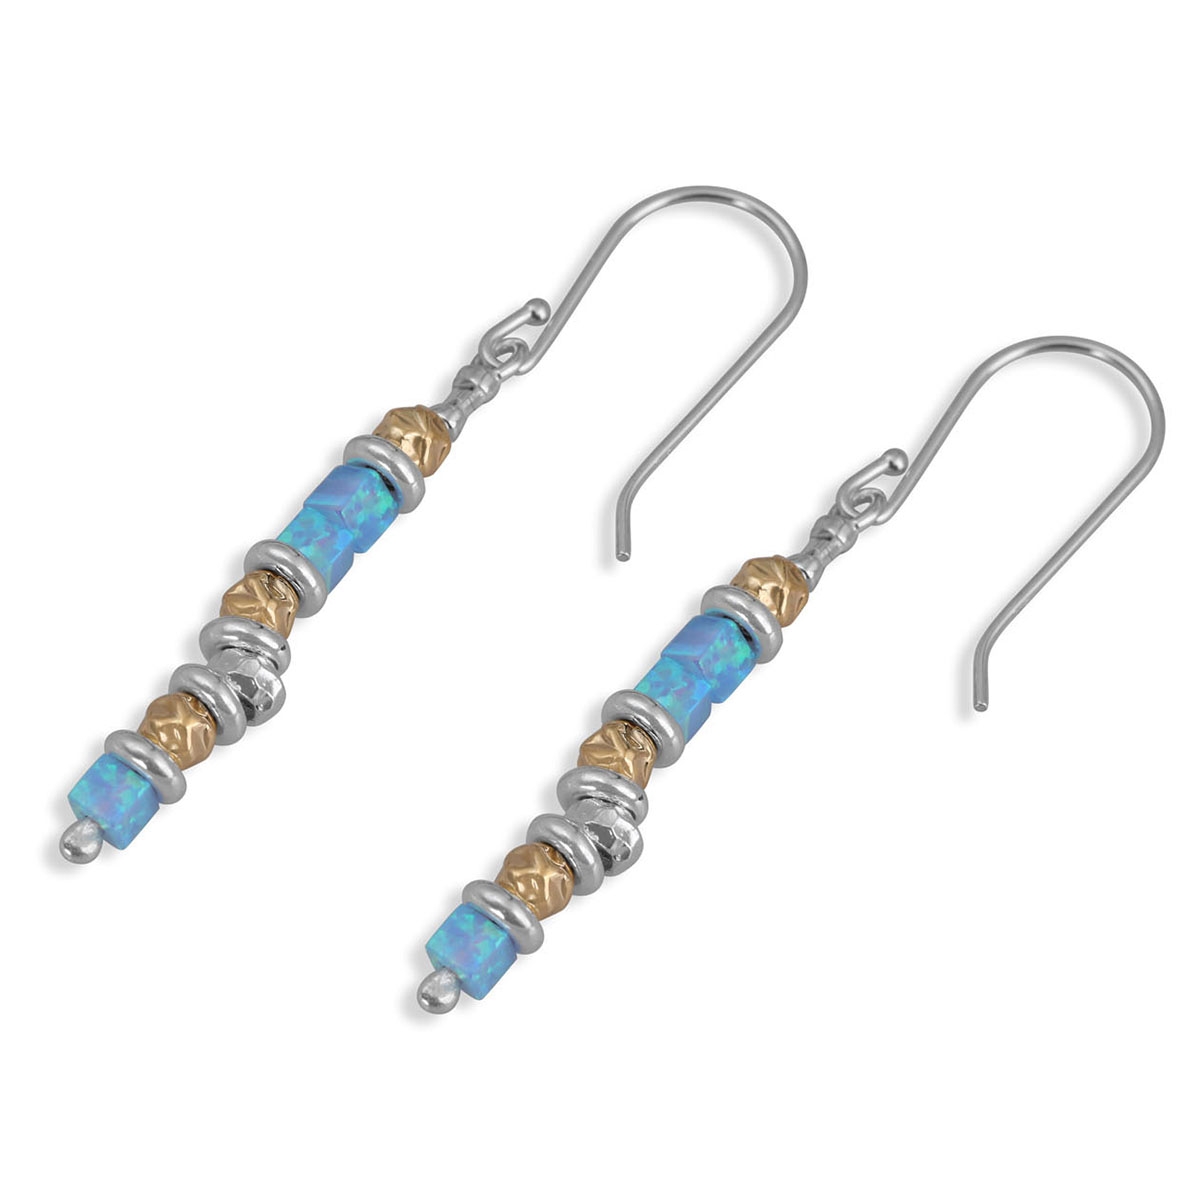 Moriah Jewelry 925 Sterling Silver and Opal Beaded Hanging Earrings  - 1